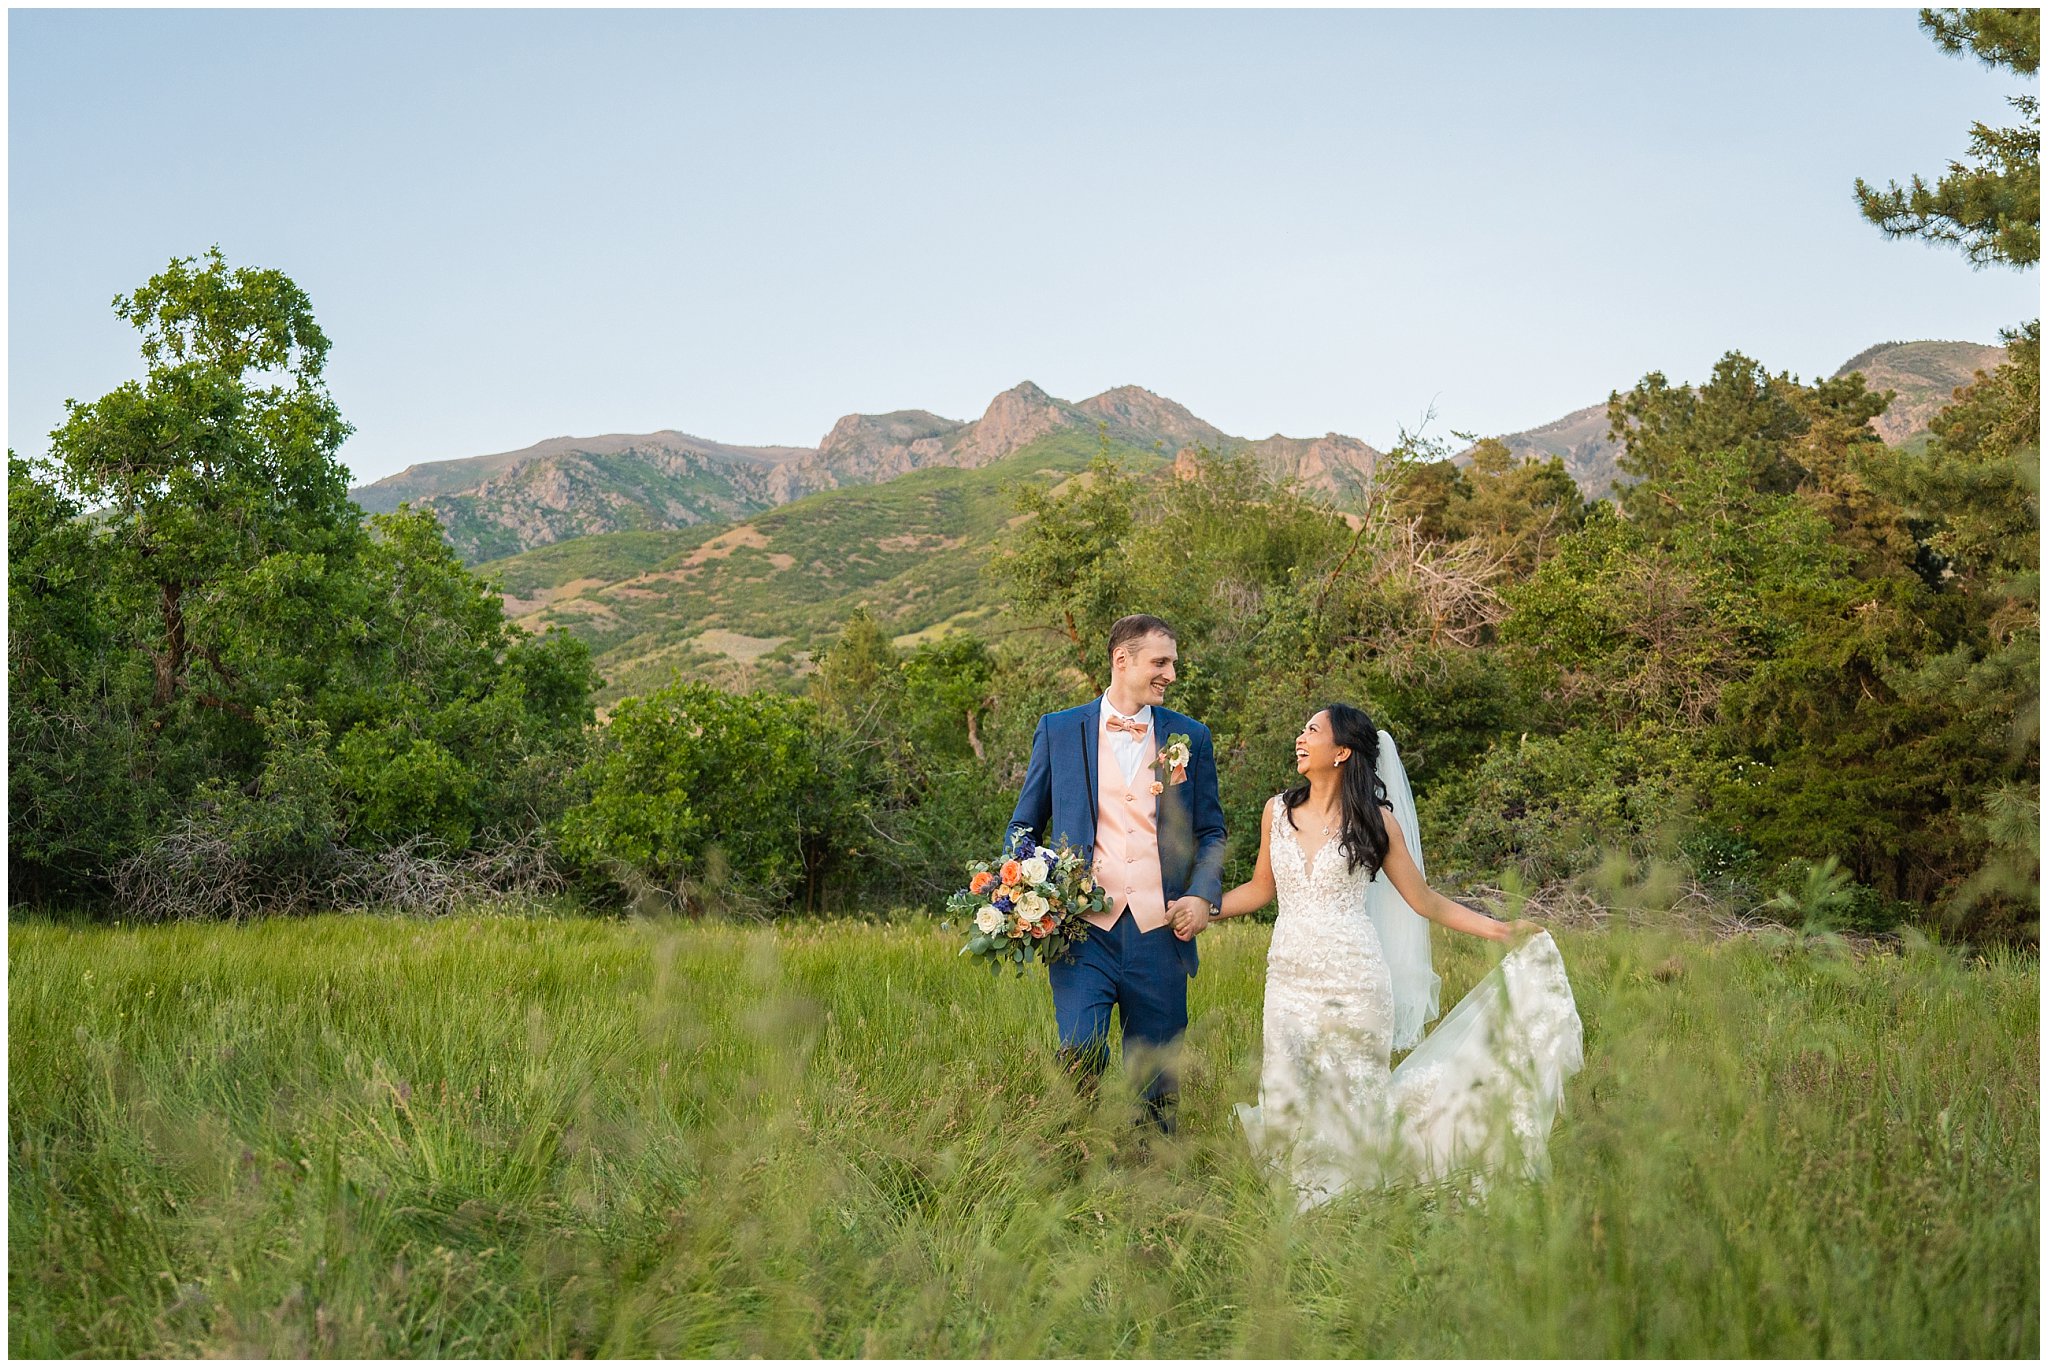 Bride and groom couple's portraits in front of mountains | Oak Hills Utah Destination Wedding | Jessie and Dallin Photography